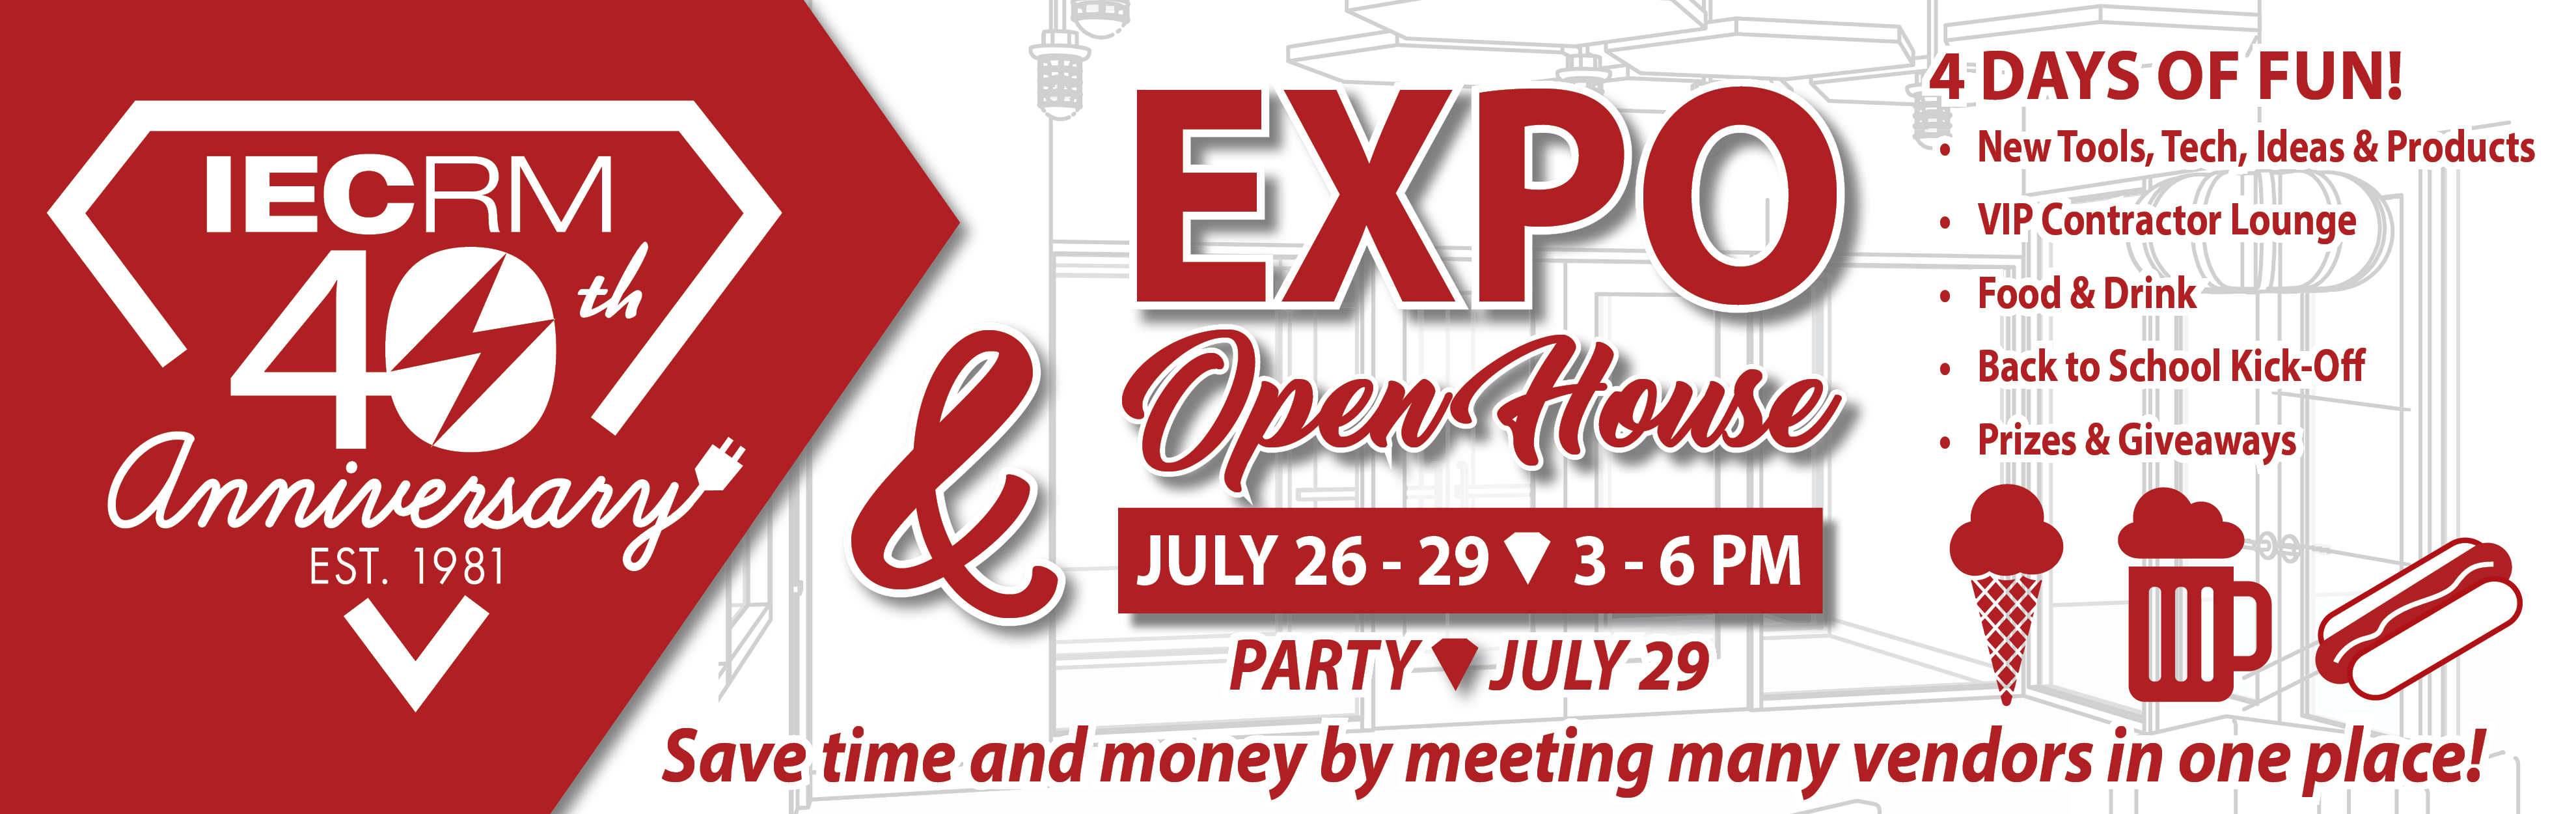 40th Anniversary Party, Expo & Open House 